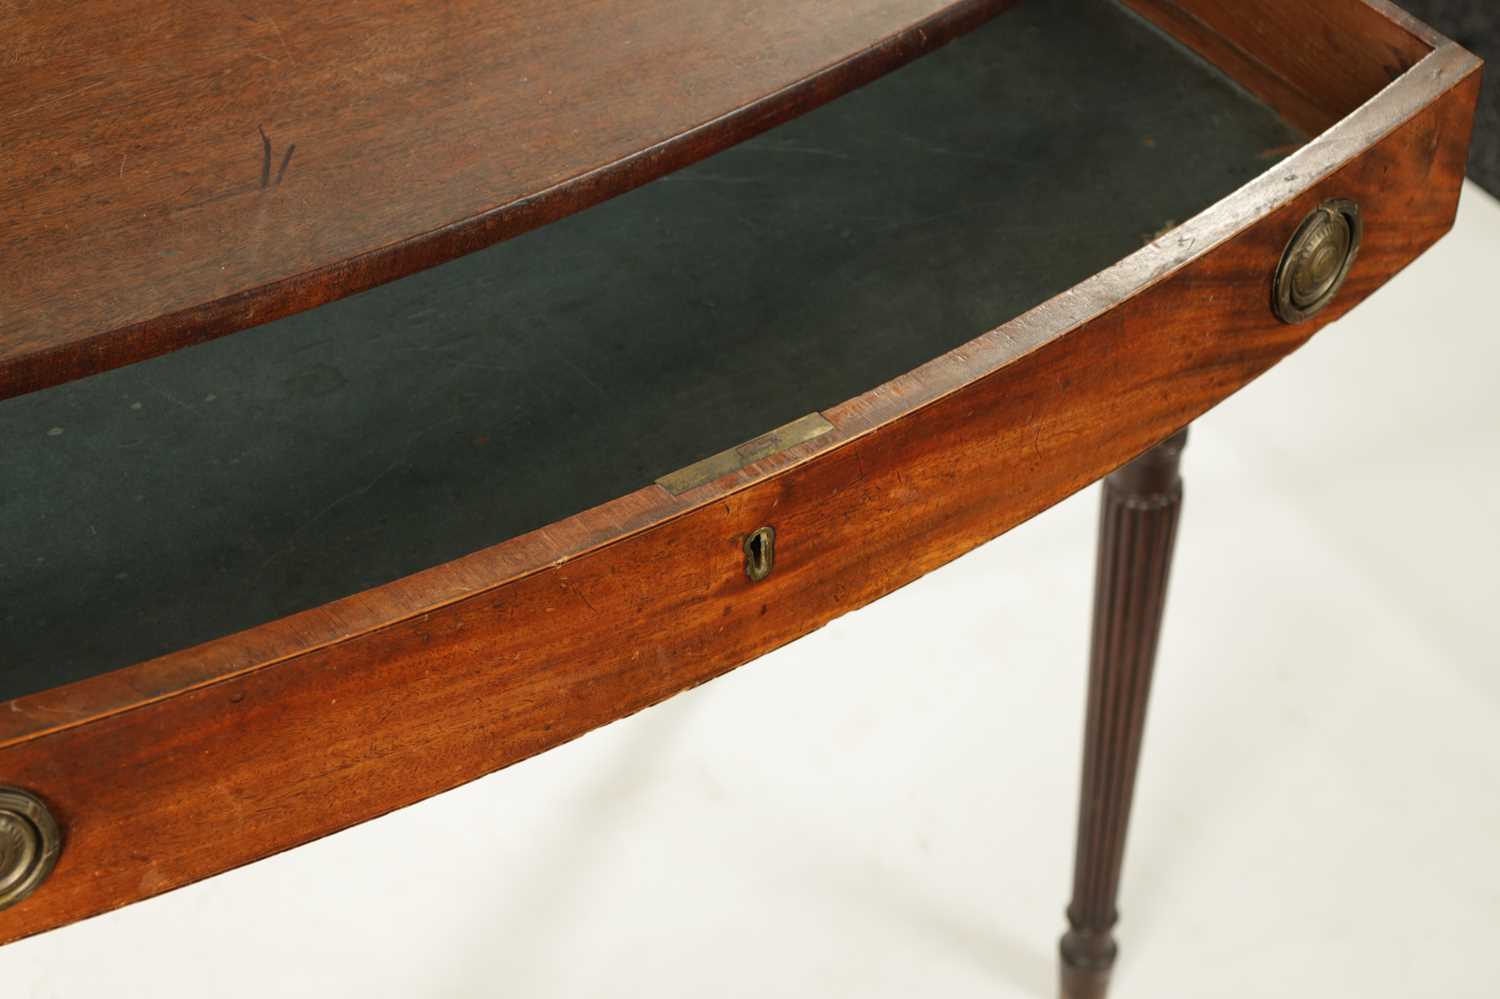 A REGENCY GILLOWS STYLE MAHOGANY BOW FRONTED SIDE TABLE - Image 4 of 5